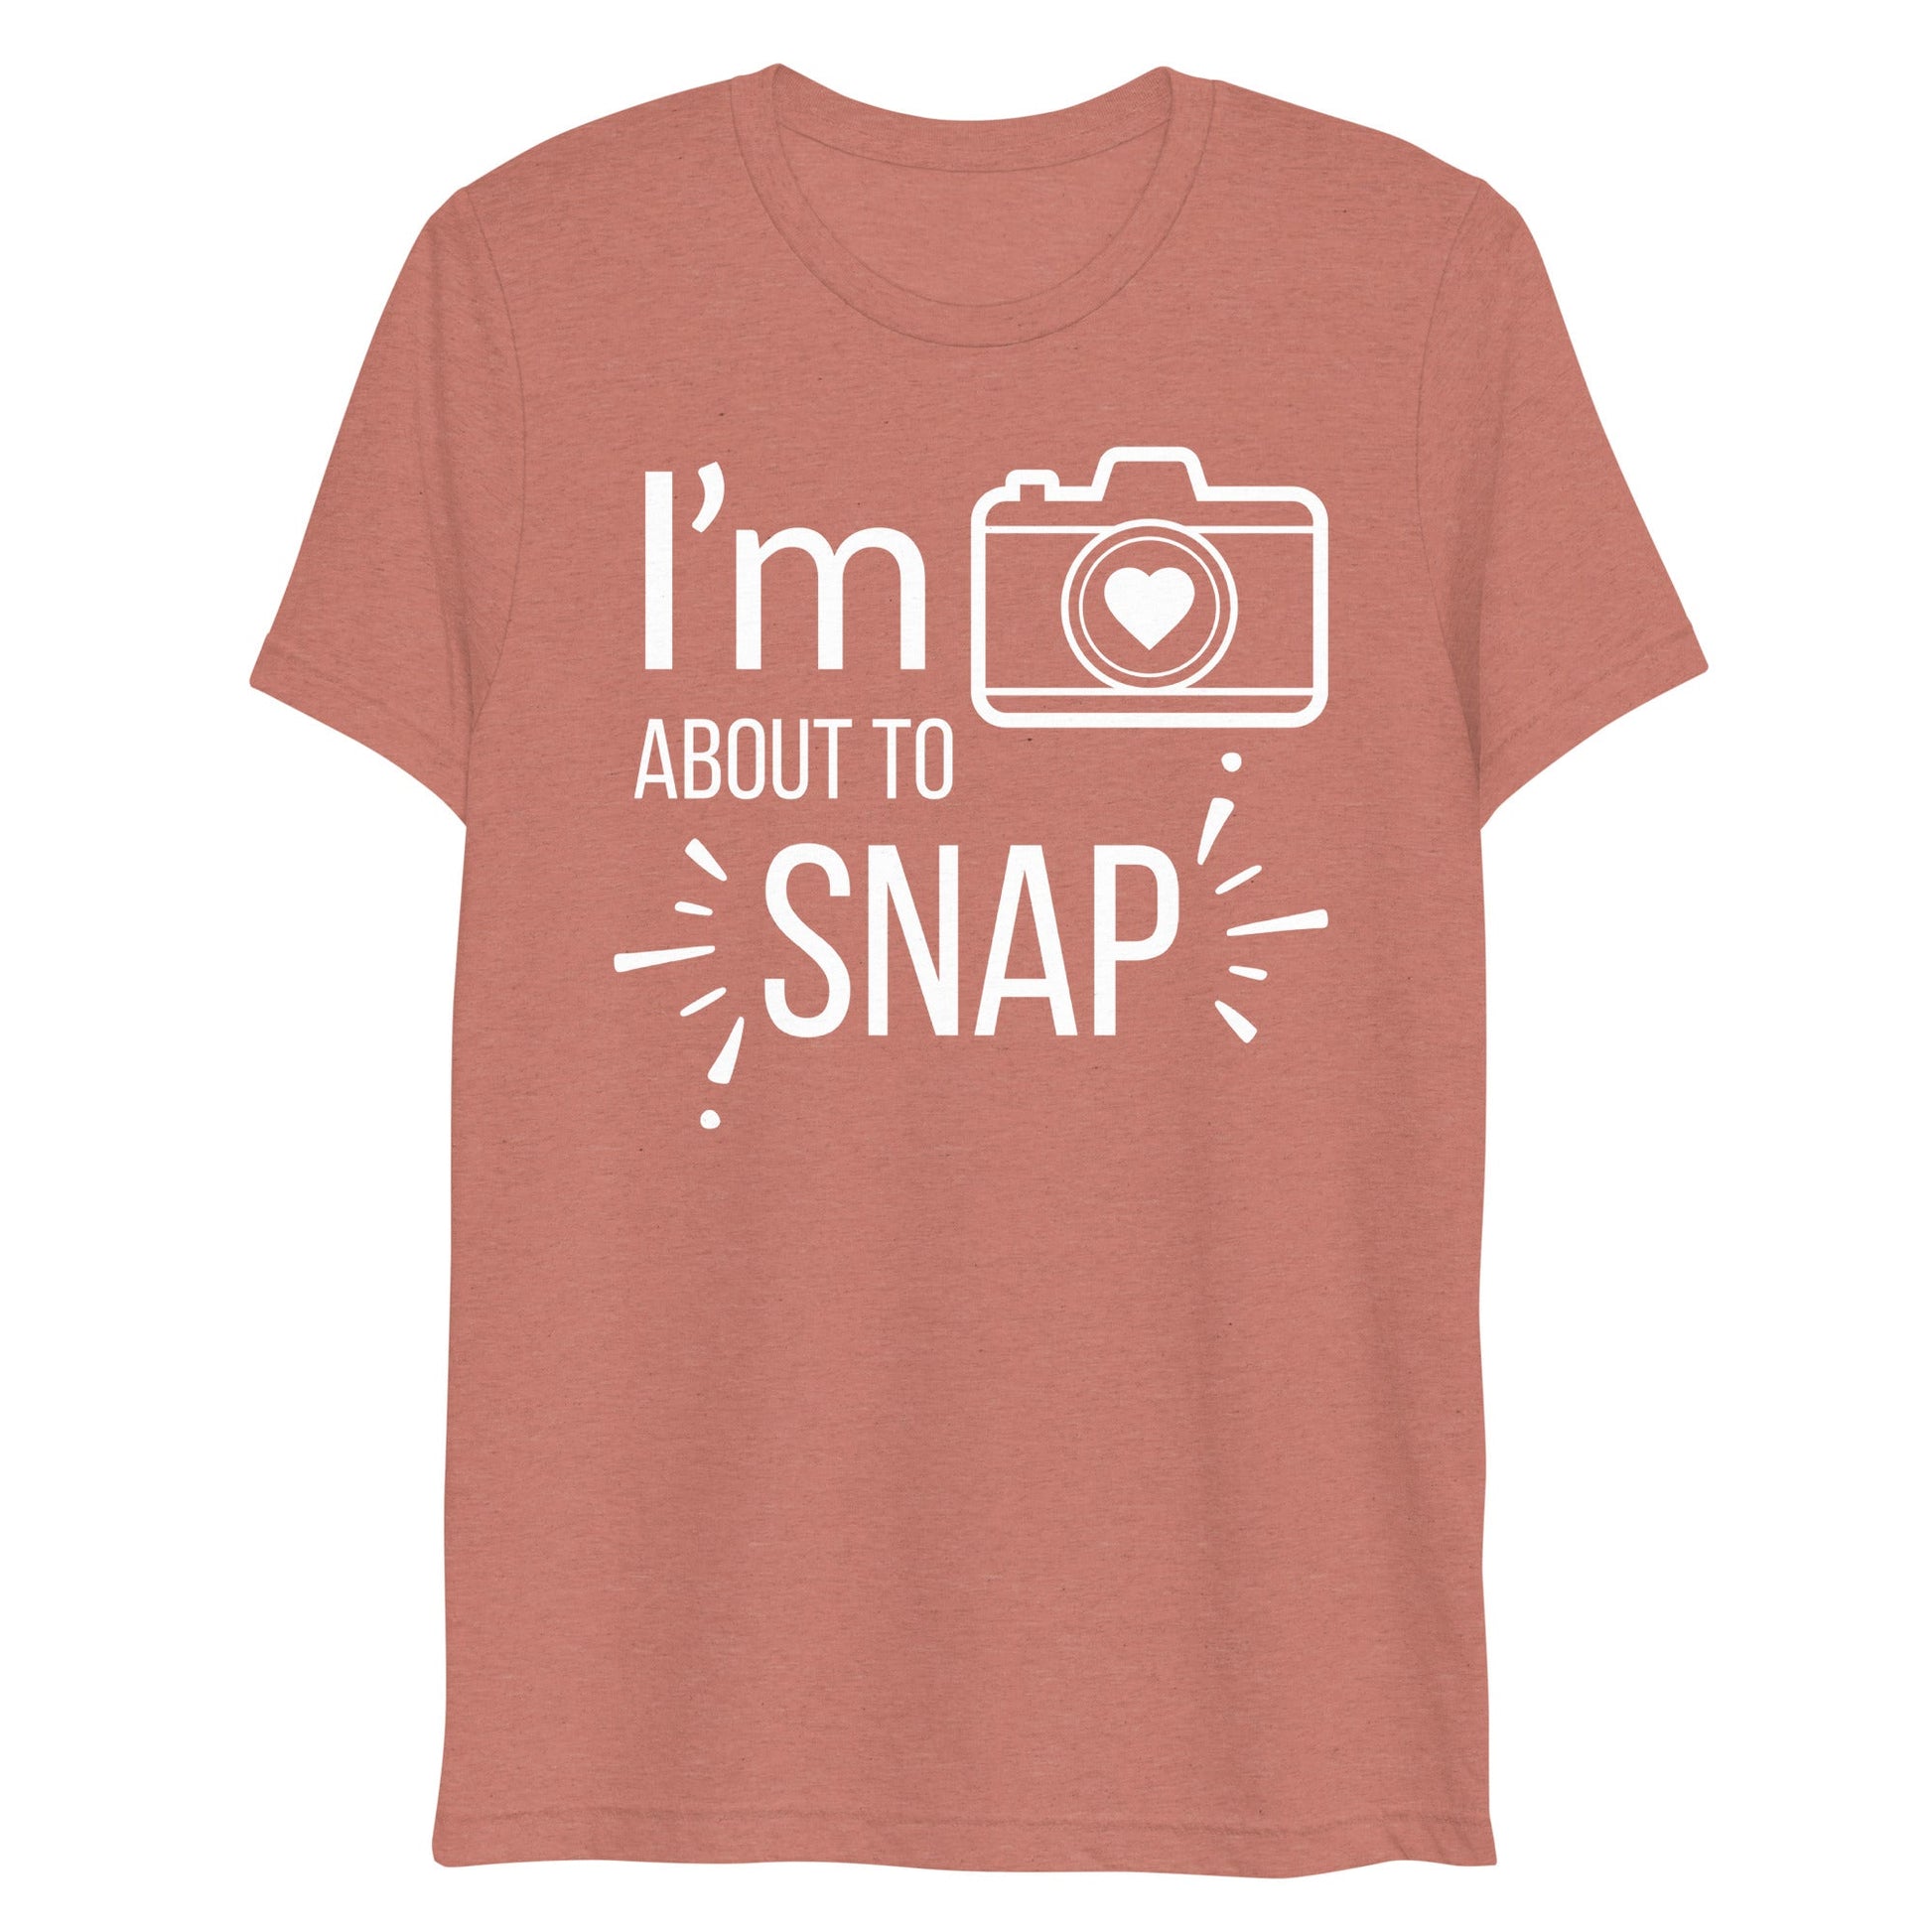 I'm About To Snap Shirt - Photography Shirt - Photographer Shirt - Gifts for Photographers - Women's Tees - Funny Shirt - ShopJeanPhotography.com